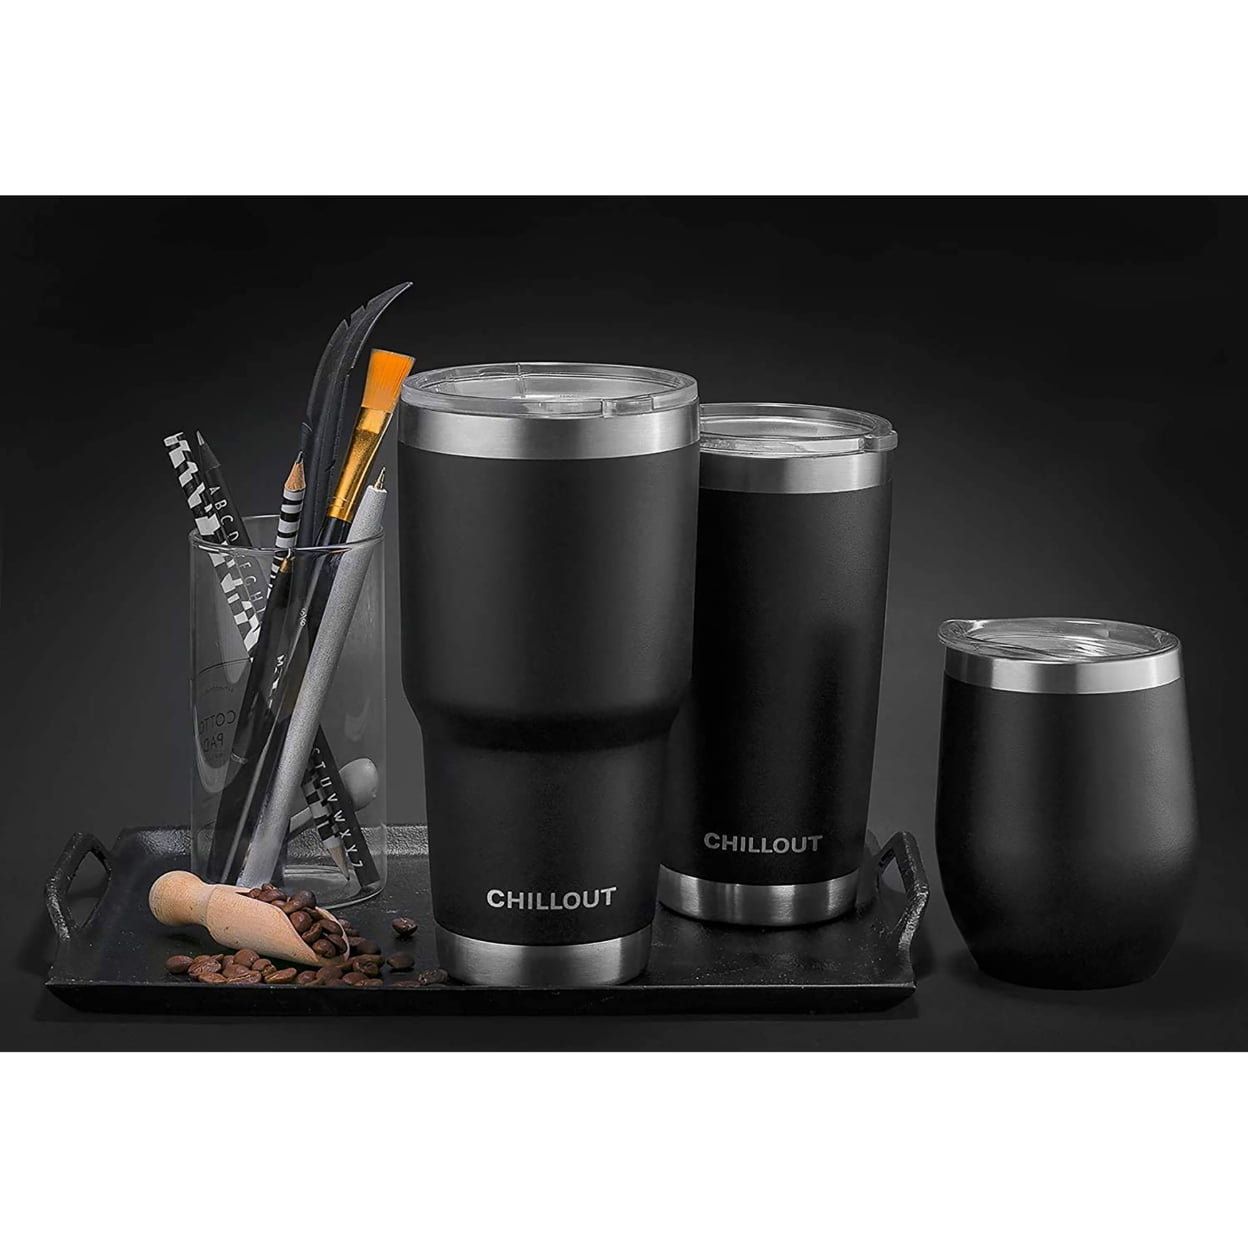 CHILLOUT LIFE Stainless Steel Travel Mug with Handle 40oz - 6 Piece Set.  Tumbler with Handle, Straw, Cleaning Brush & 2 Lids